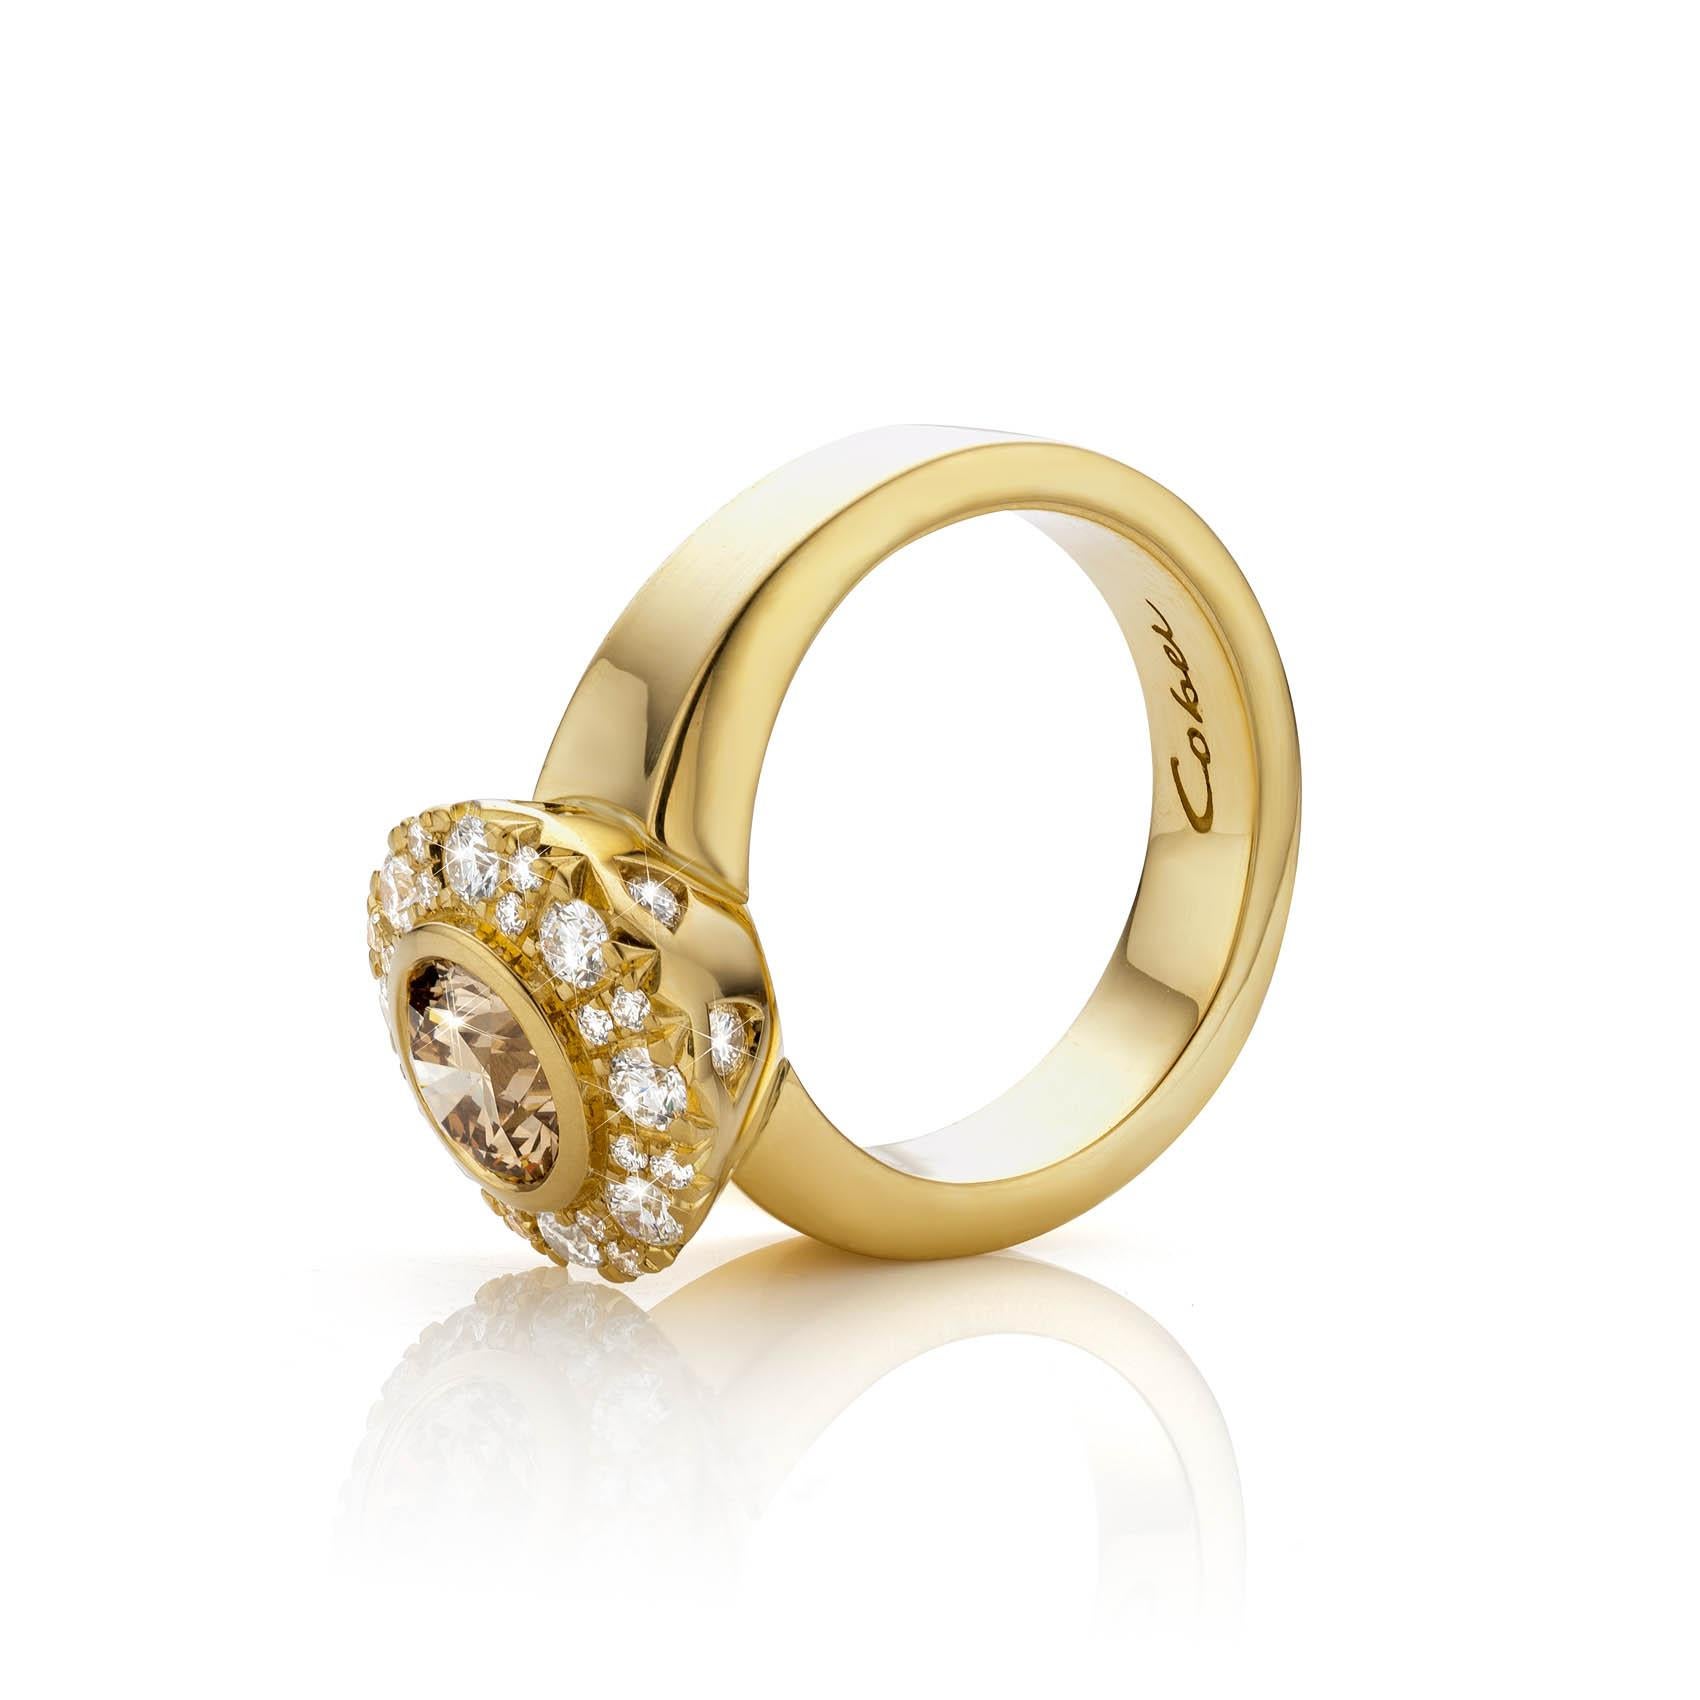 Contemporary Cober “Engraved Cluster” with a 1.31 ct Cognac Diamond and 30 Diamonds Ring For Sale